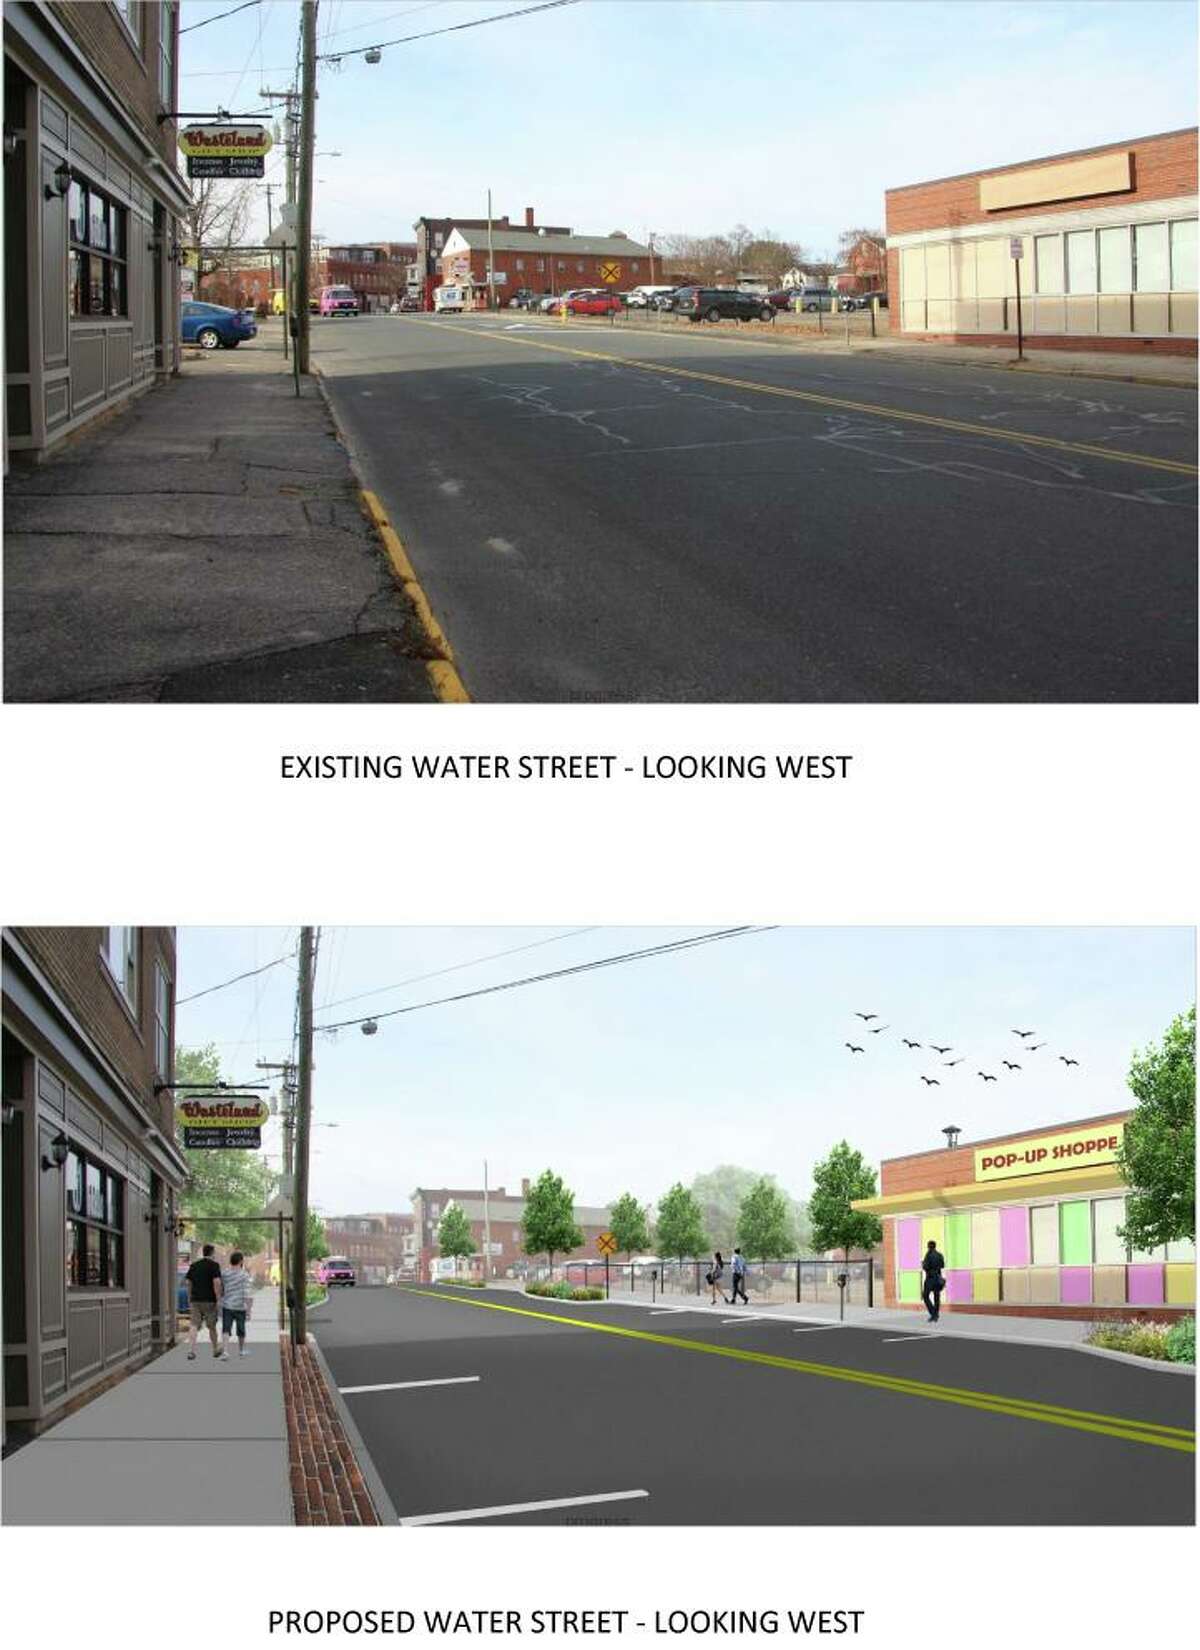 Repairs to Water Street's sidewalks, street improvements and pedestrian safety measures are illustrated in these drawings provided by Torrington's office of economic development, which would become part of a plan that also includes Railroad Station Place, John Street, Church Street and Mason Street. Pictured is a concept design for Water Street, which would be improved with pedestrian safety measures. The grant also would include a number of other projects. 